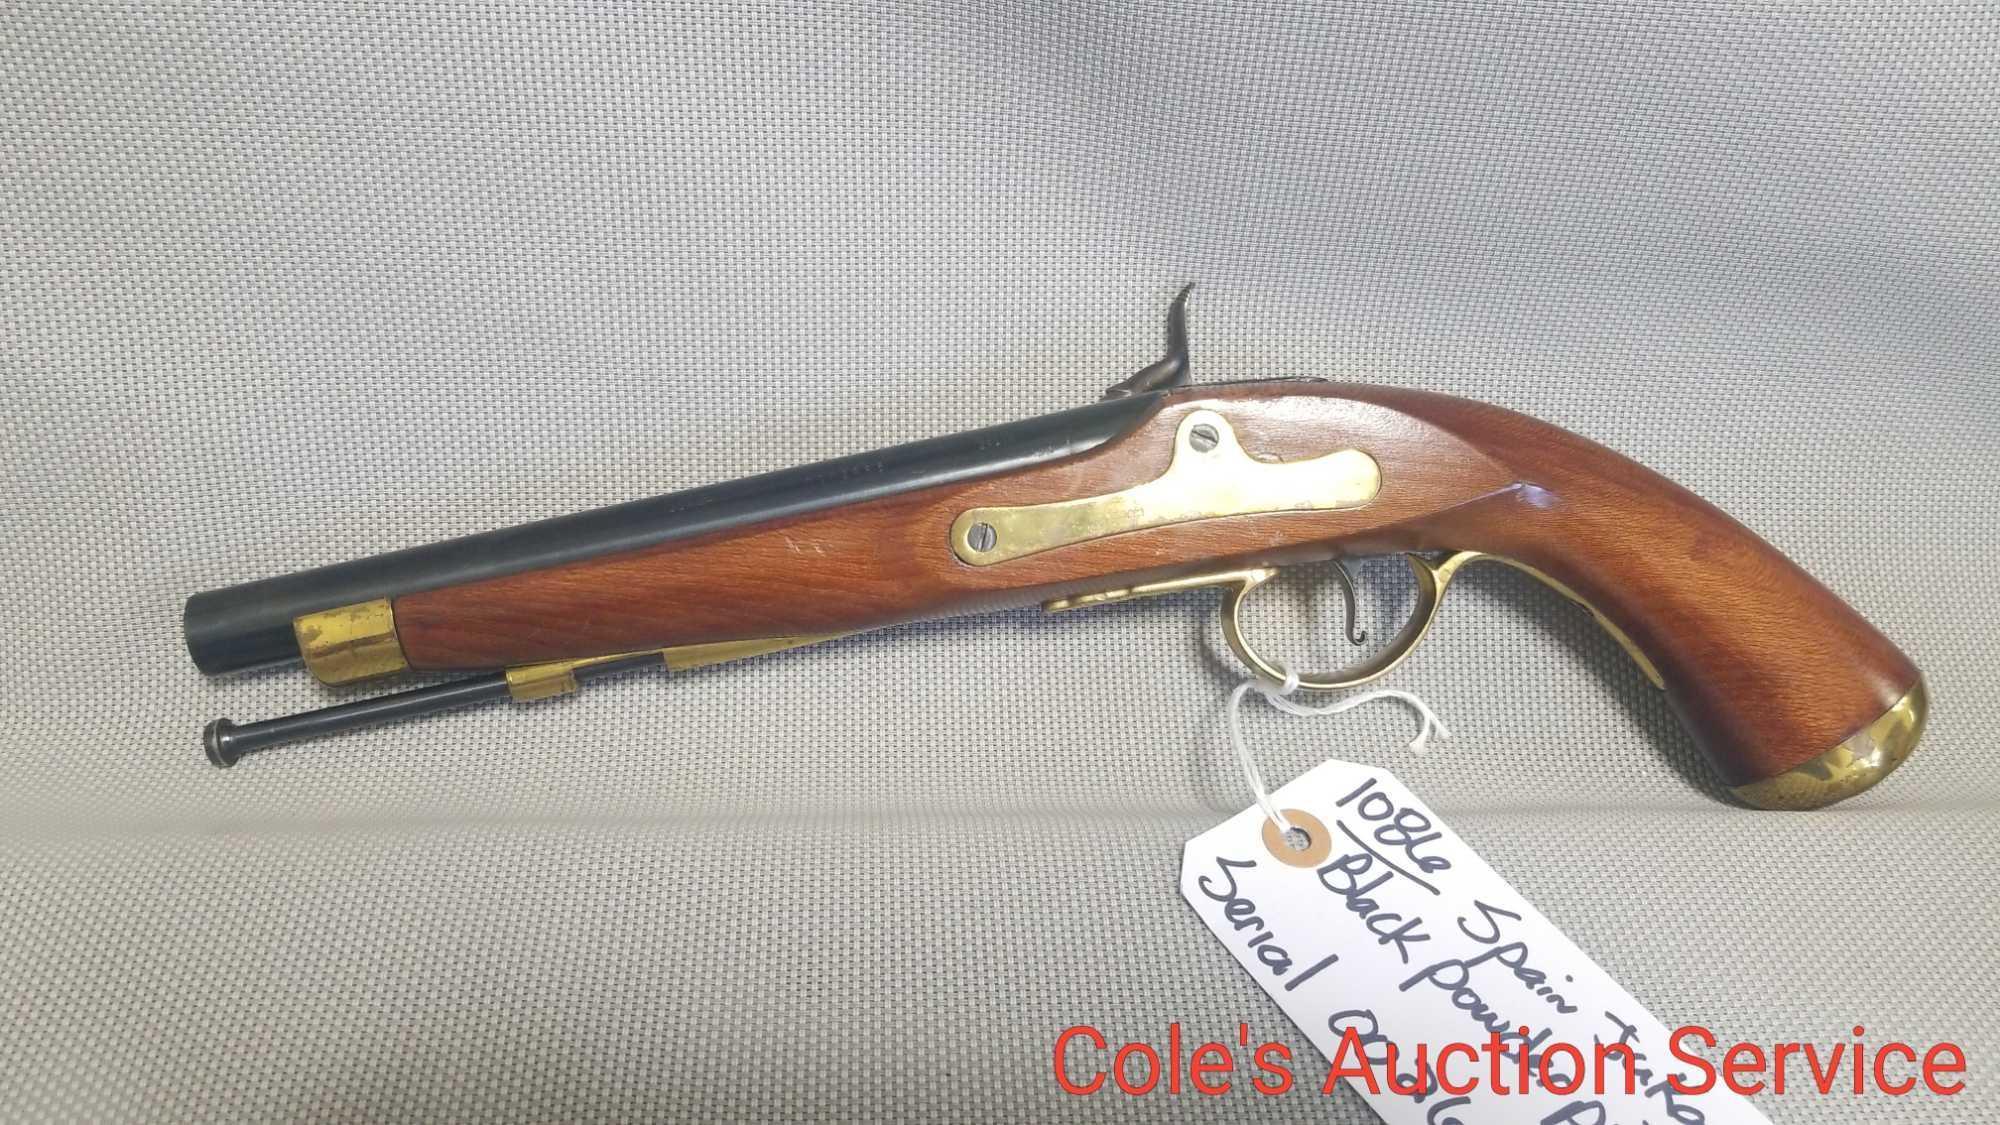 Black powder pistol marked Jukar Spain serial number 002665. Measures 15 in overall with a 9 inch